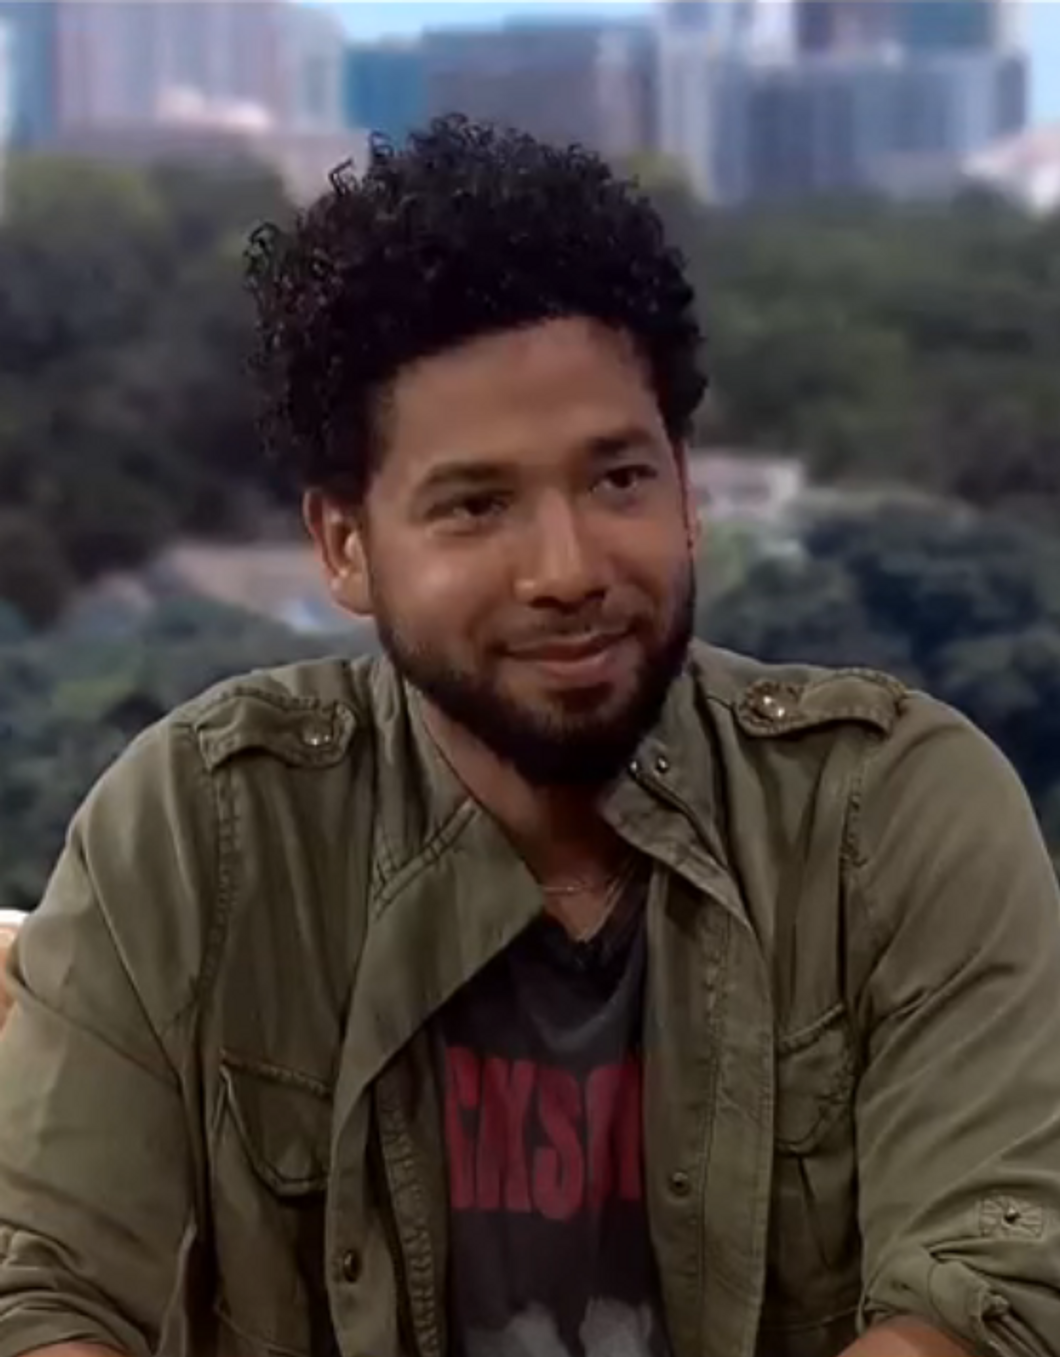 The Attack On Jussie Smollett Was A Hate Crime